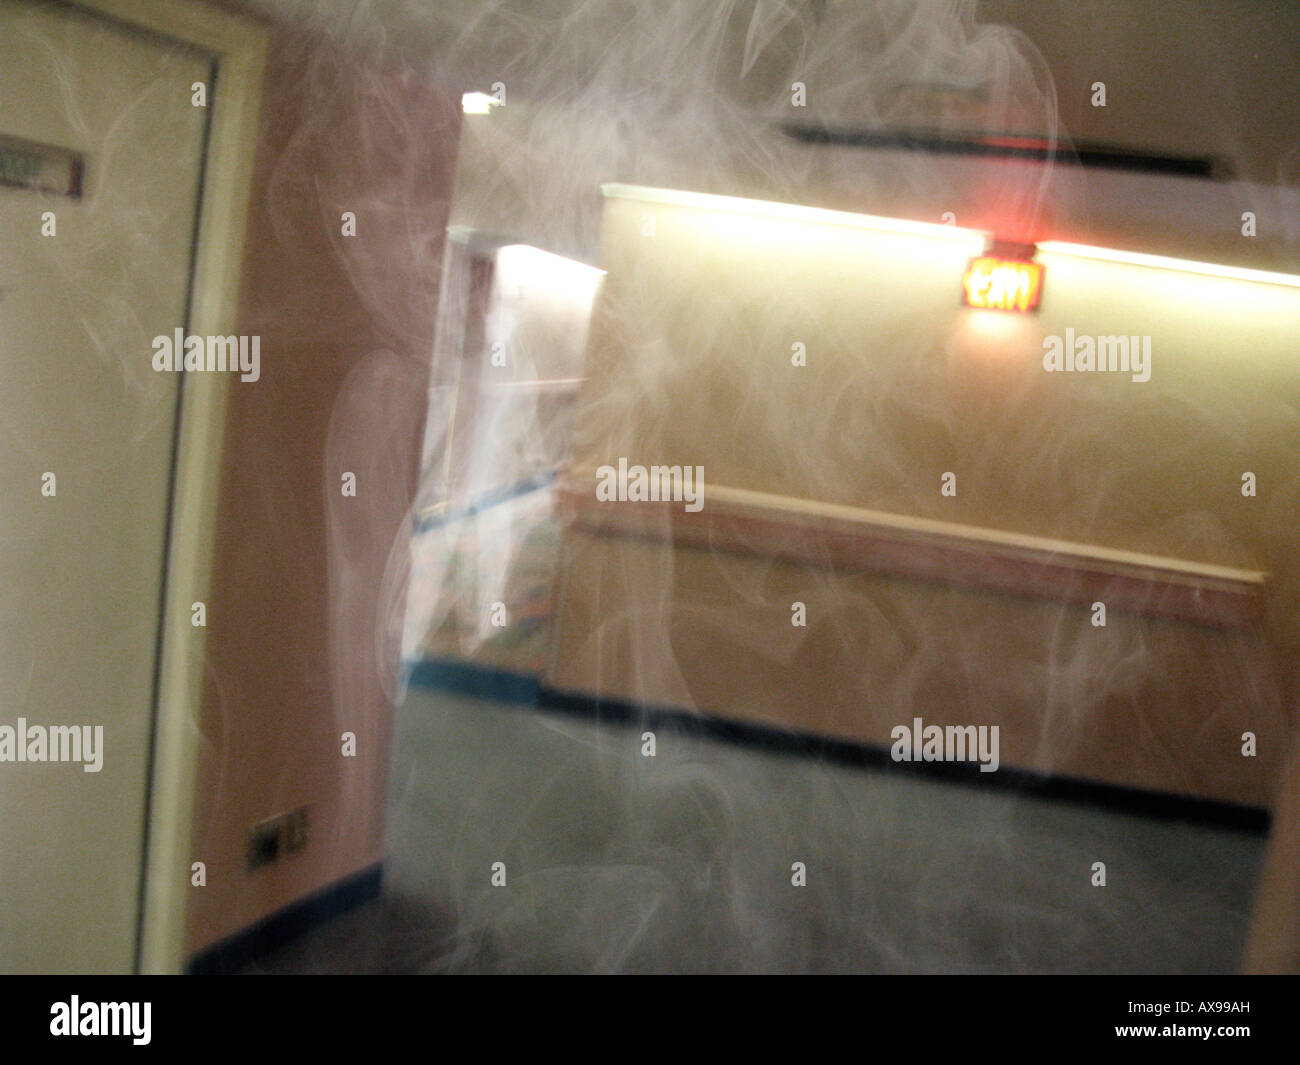 Image of a 'ghost' captured in Hotel hallway. Stock Photo